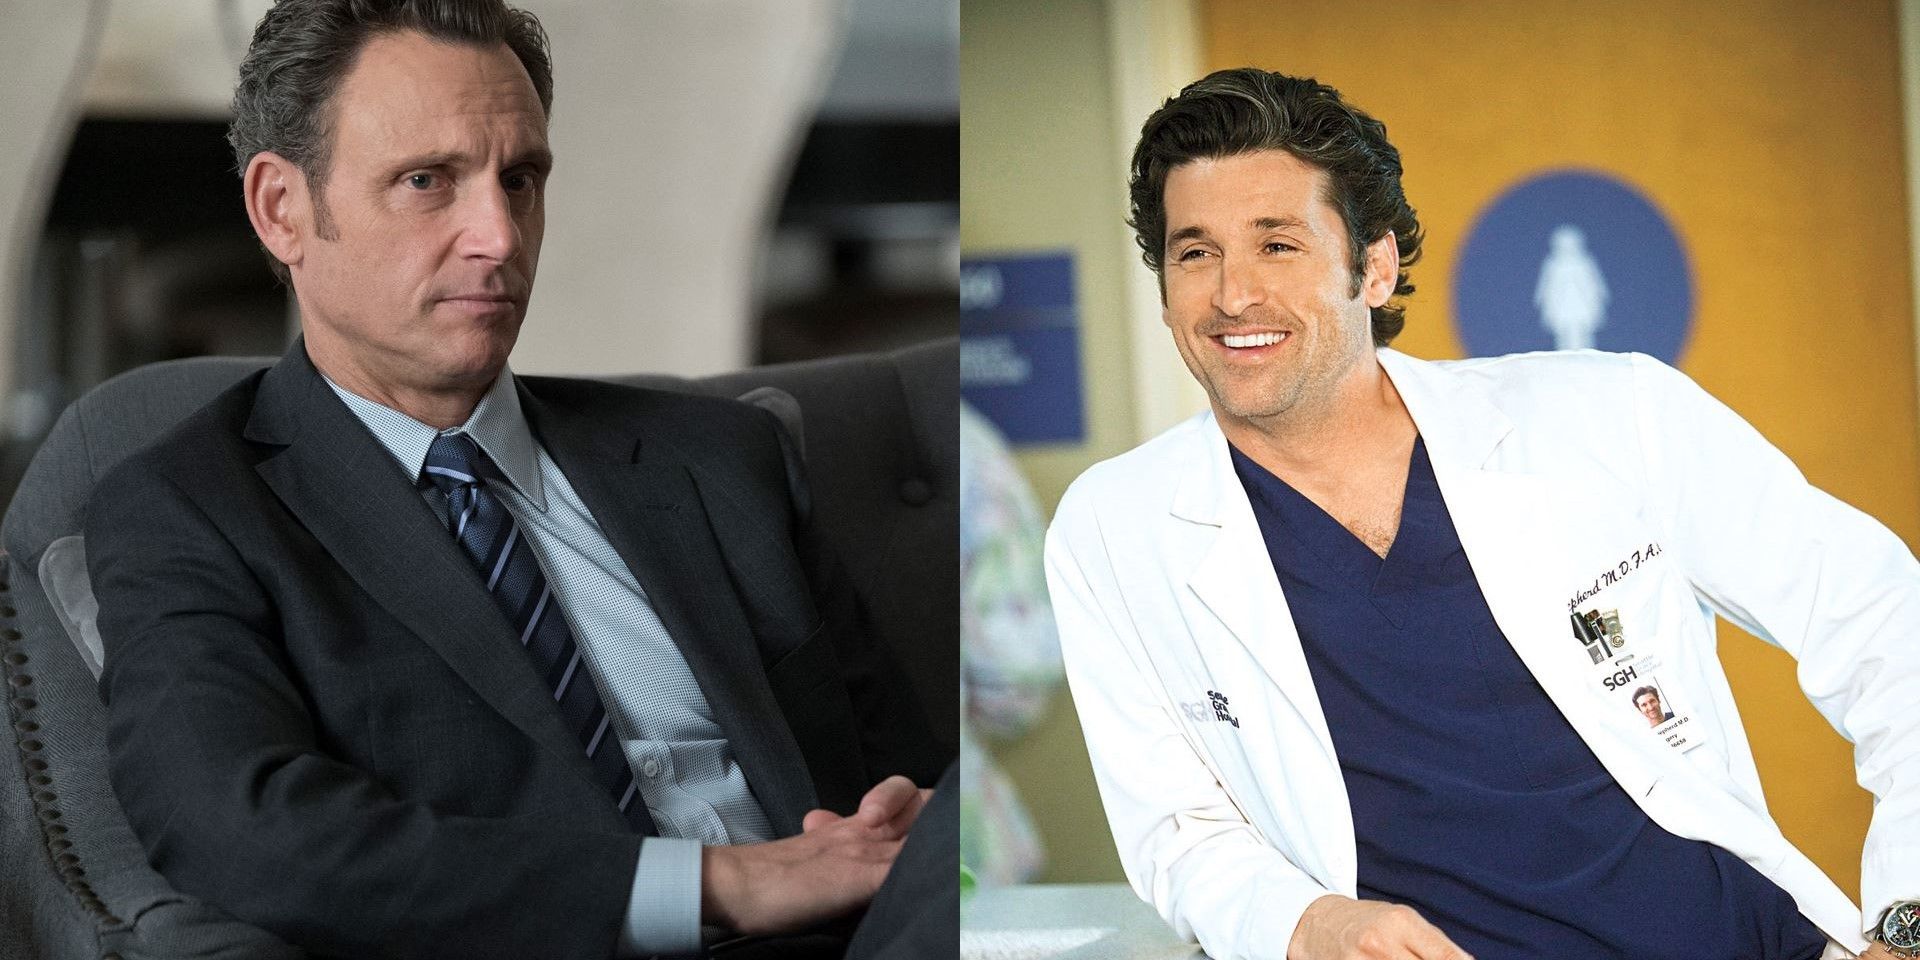 Shondaland Characters: 5 Friendships That Would Work (& 5 That Would Turn Ugly)